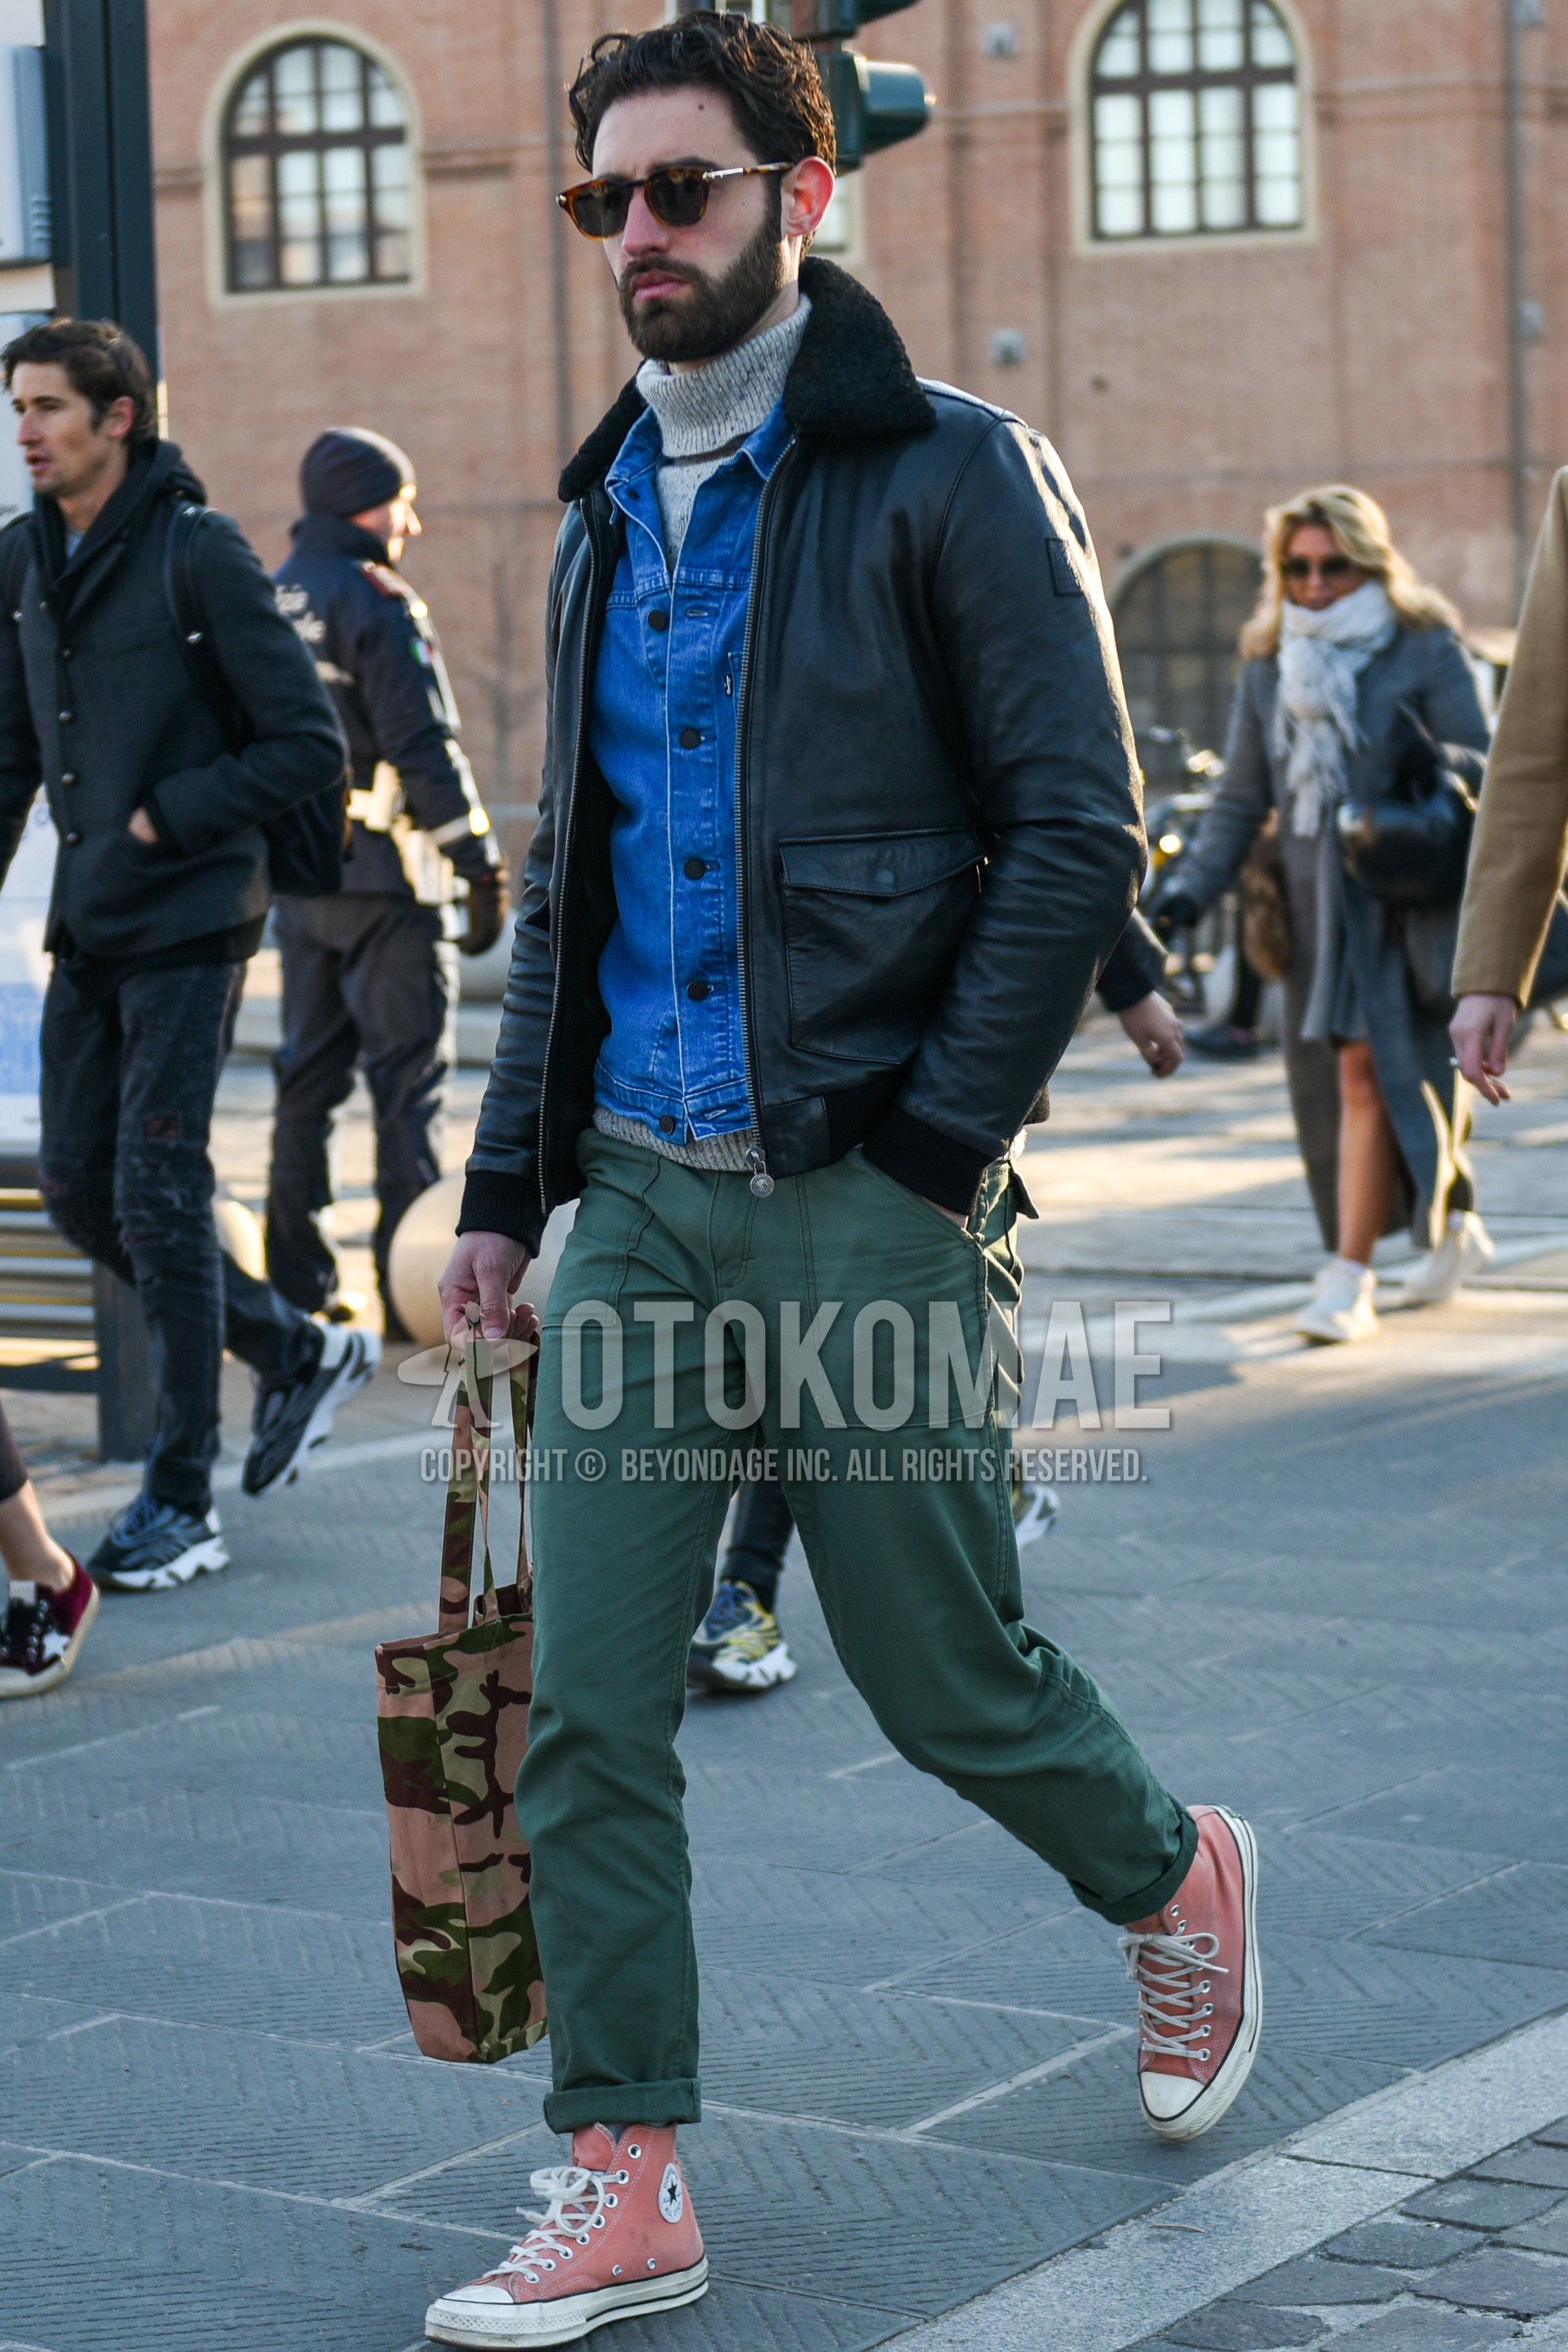 Men's autumn winter outfit with brown tortoiseshell sunglasses, black plain leather jacket, blue plain denim jacket, black plain military jacket, green plain turtleneck knit, olive green plain chinos, gray plain socks, pink low-cut sneakers, multi-color camouflage tote bag.